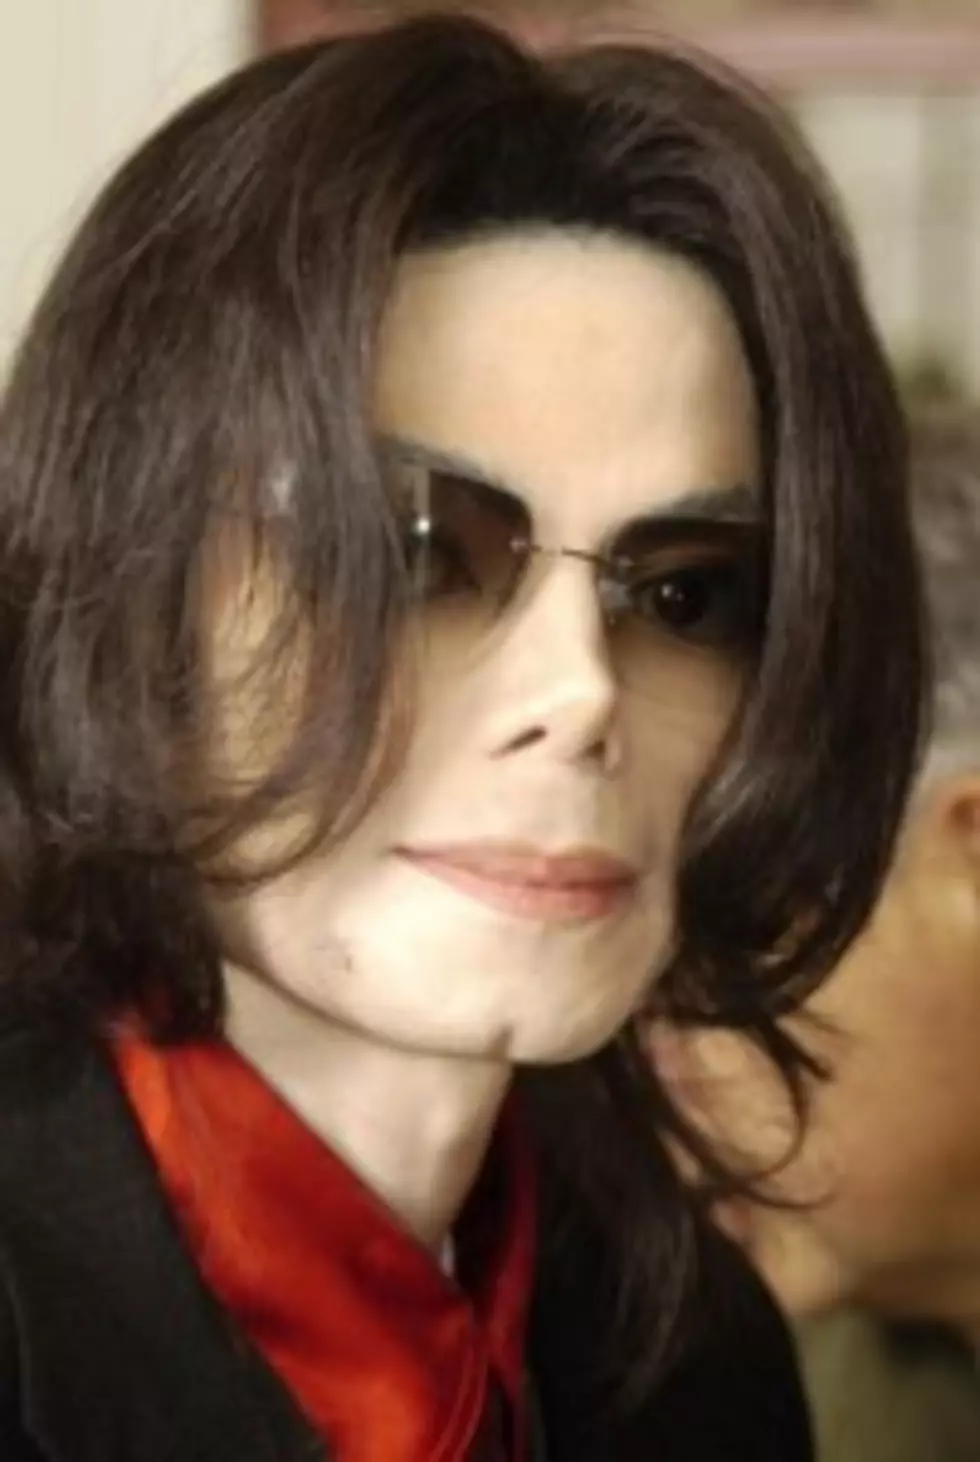 Remembering Michael Jackson the ‘King of Pop’ on His Birthday [VIDEOS]